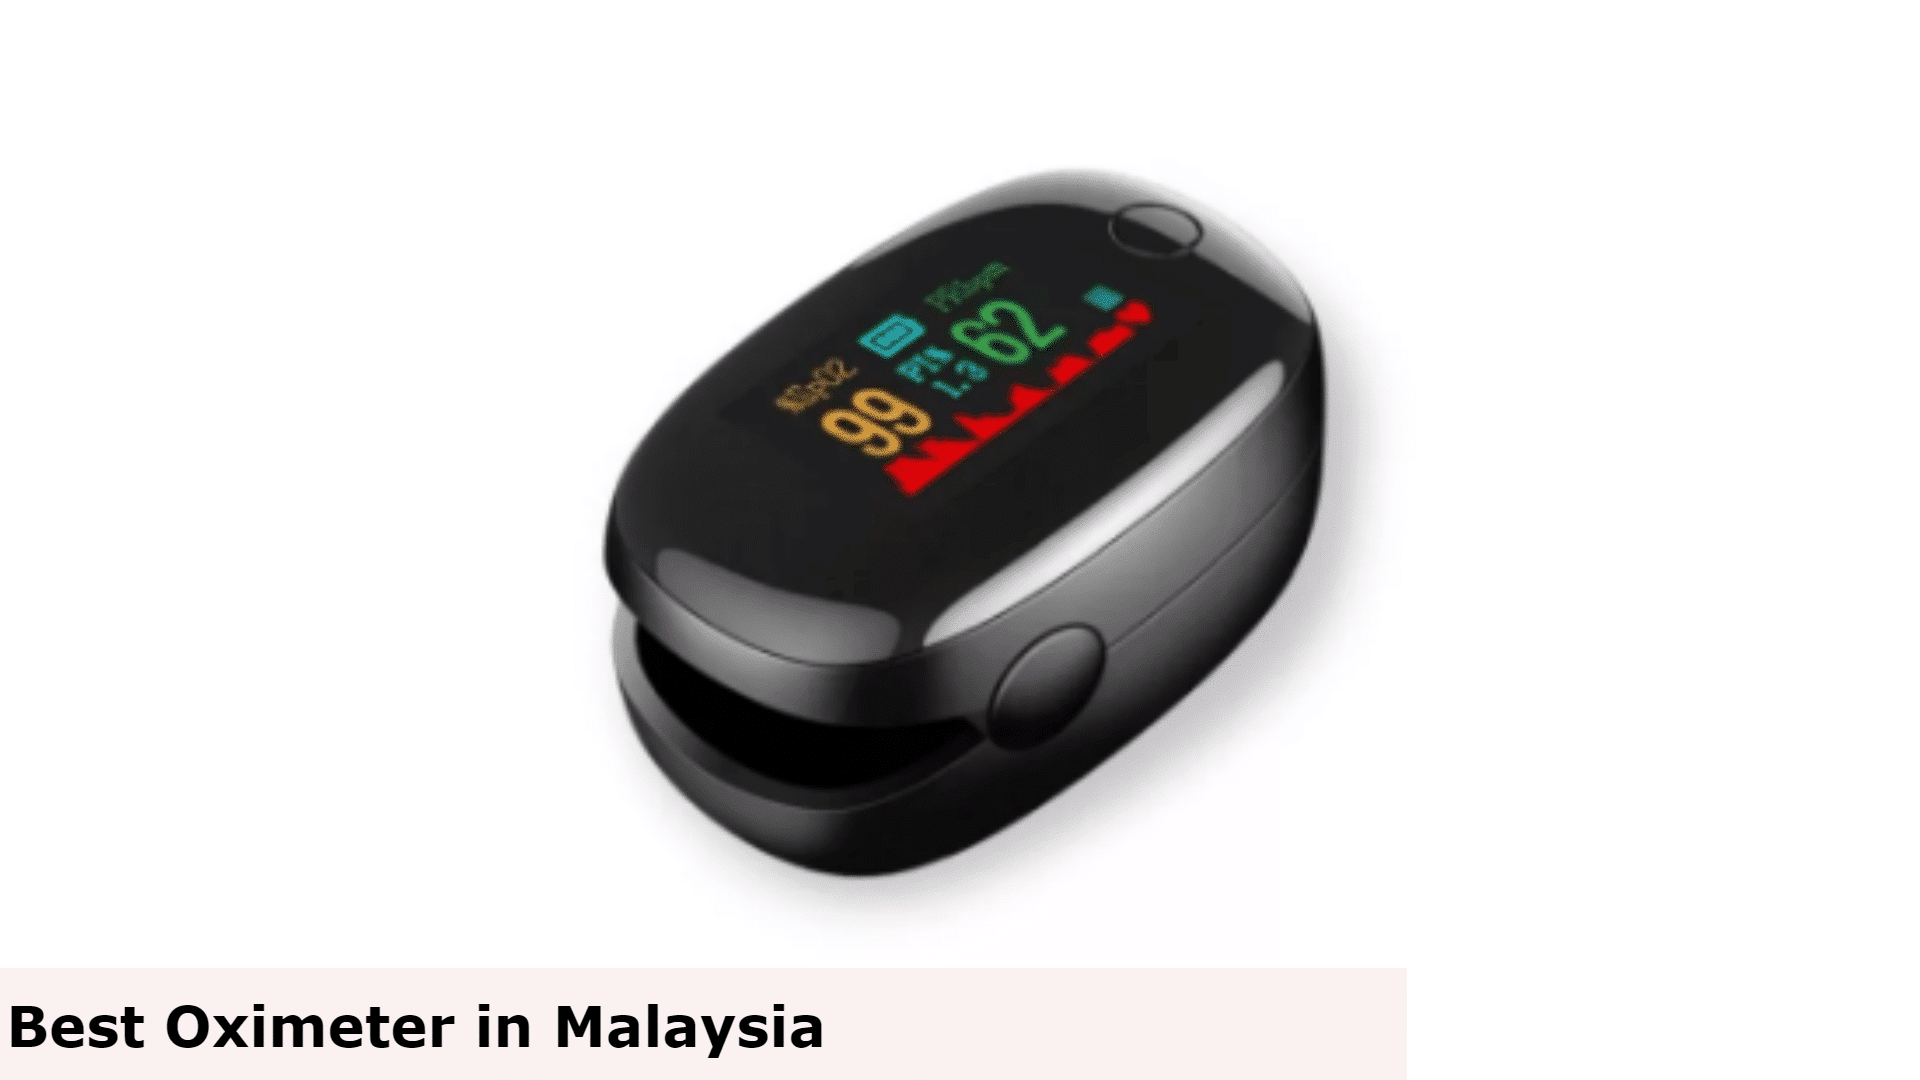 King Pulse Oximeter  - Best Oximeter in Malaysia, Oximeter Malaysia, How to use an Oximeter, oximeter reading Malaysia, oximeter normal range, pulse oximeter, oximeter price Malaysia, oximeter use, 
oximeter covid, oximeter amazon, Can an Oximeter Help Detect COVID-19 at Home, Blood oxygen levels Oximeter Malaysia,